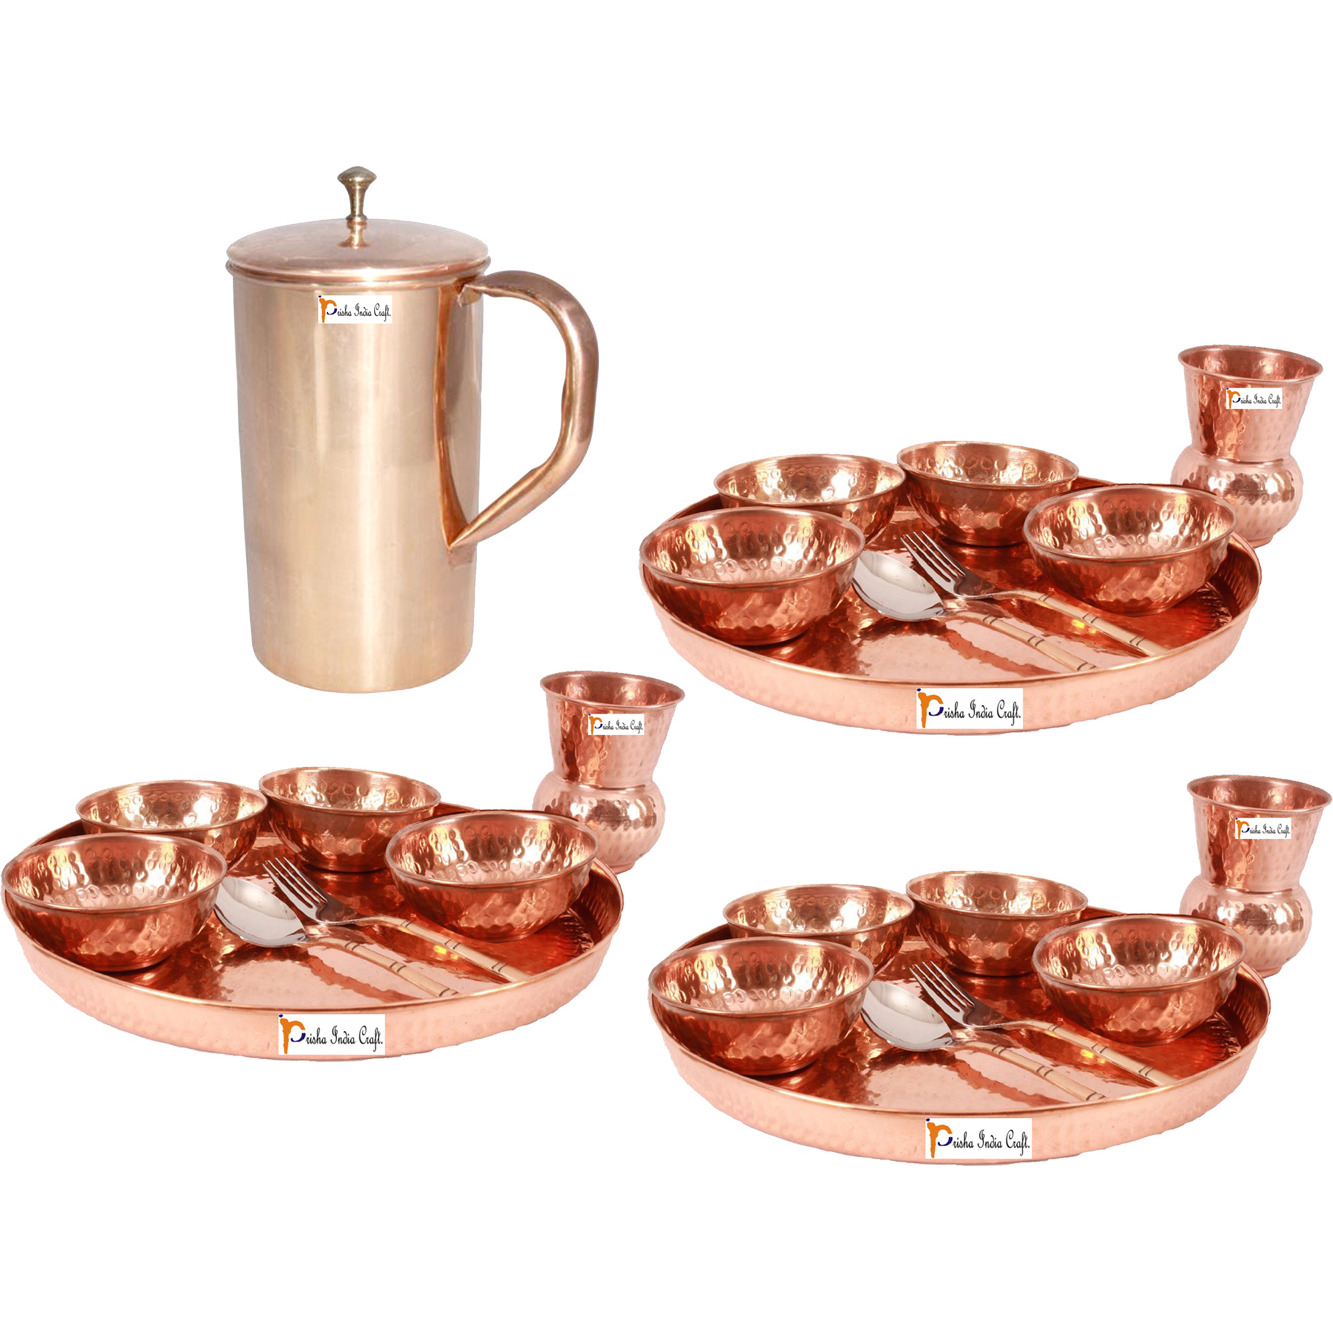 Prisha India Craft B. Set of 3 Dinnerware Traditional 100% Pure Copper Dinner Set of Thali Plate, Bowls, Glass and Spoon, Dia 12  With 1 Pure Copper Classic Pitcher Jug - Christmas Gift